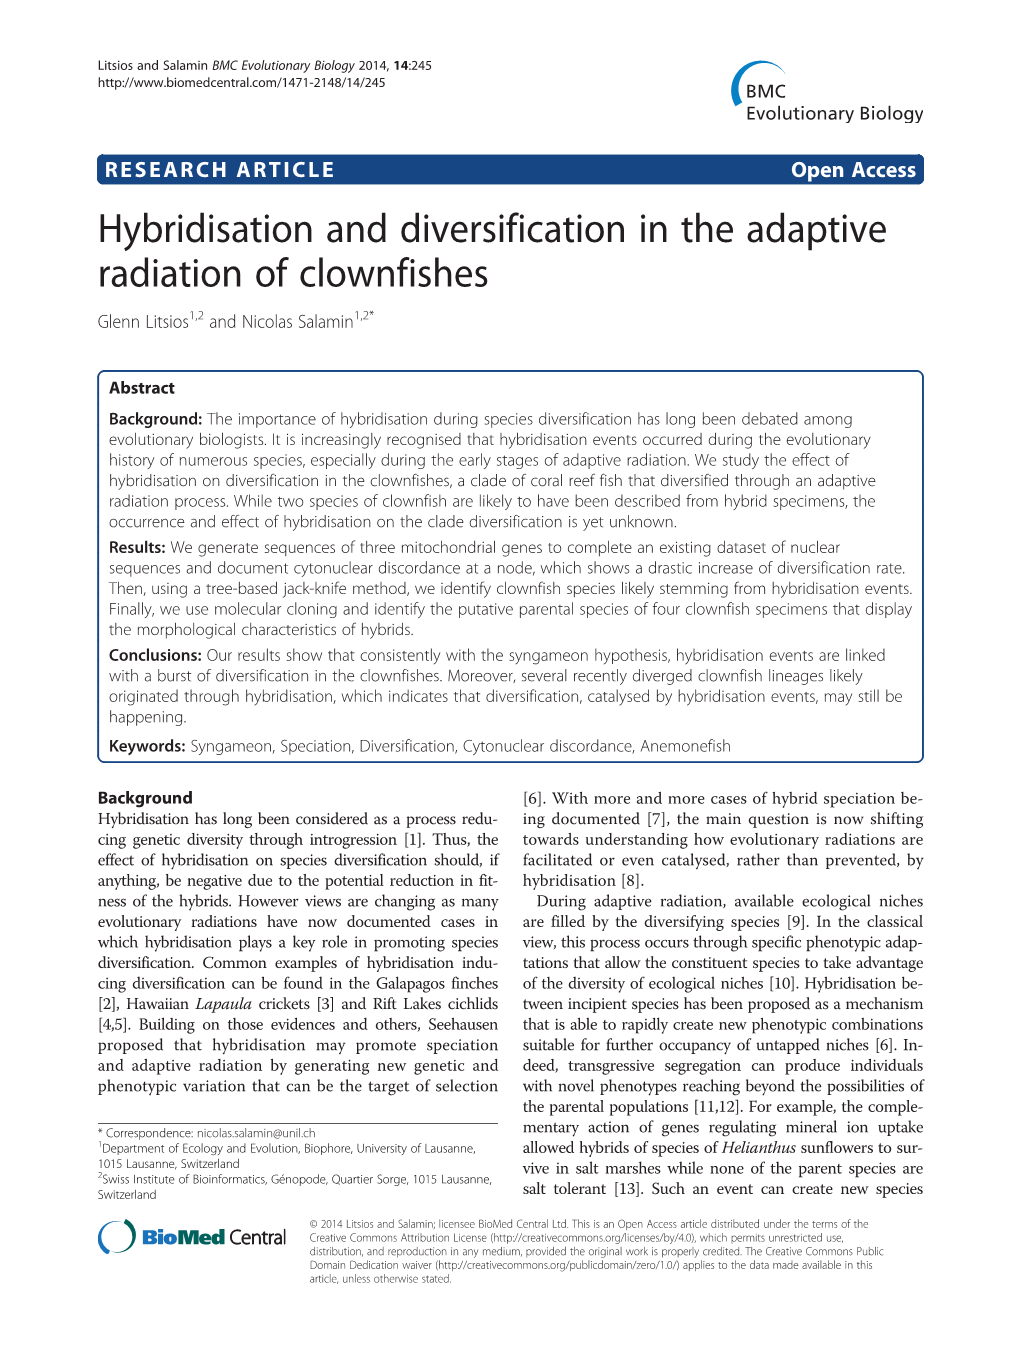 Hybridisation and Diversification in the Adaptive Radiation of Clownfishes Glenn Litsios1,2 and Nicolas Salamin1,2*